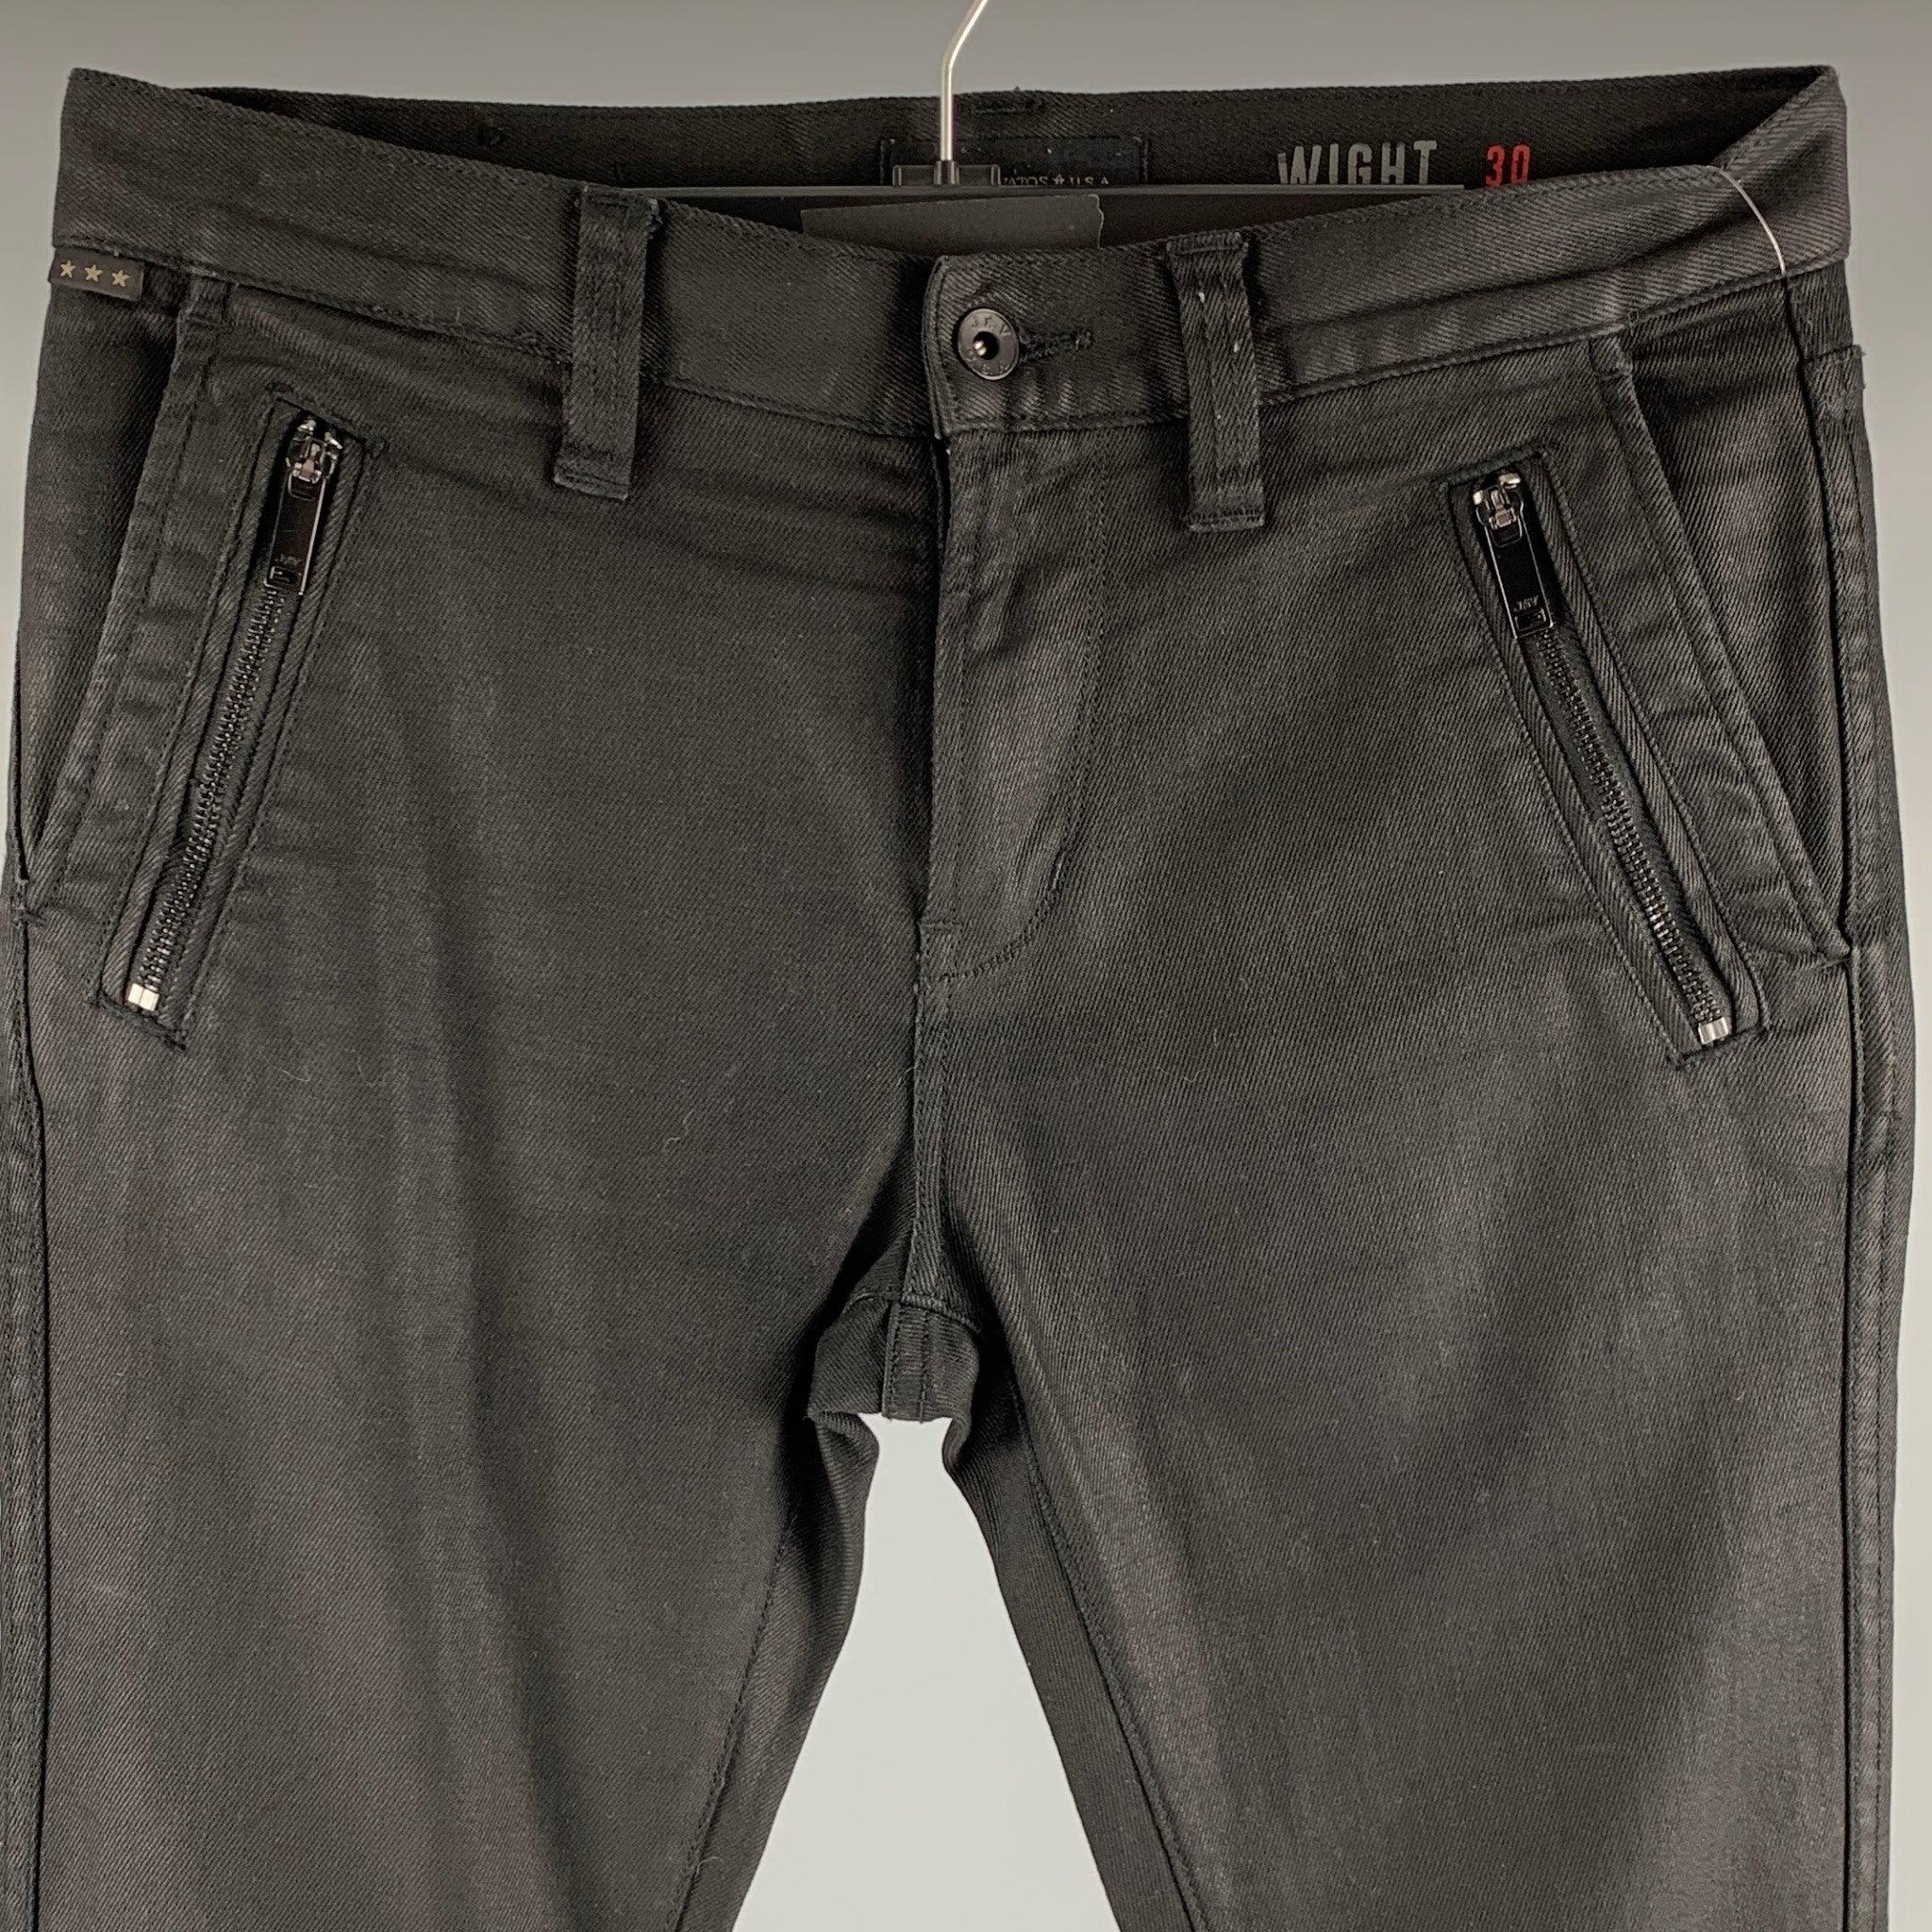 JOHN VARVATOS * U.S.A. Size 30 Black Cotton Blend Jeans In Good Condition For Sale In San Francisco, CA